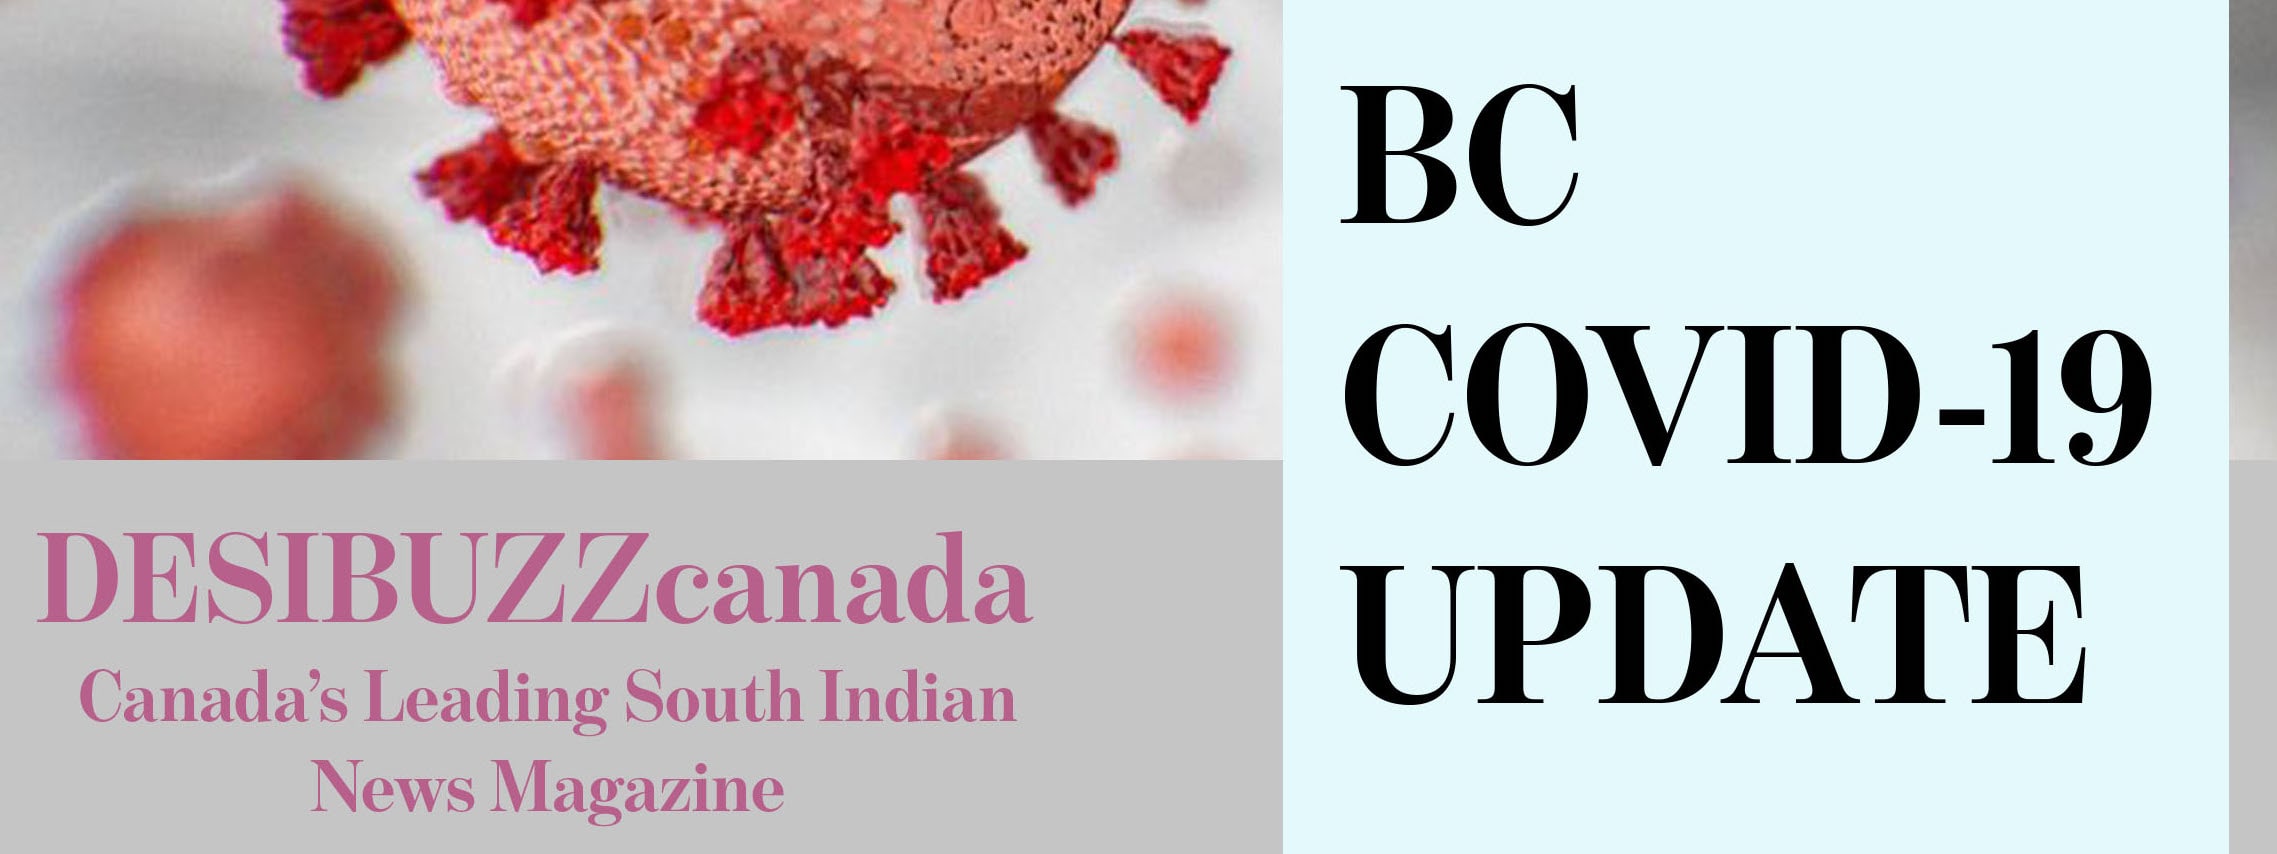 BC COVID-19 DAILY UPDATE: Cases Remain Below 800 For Second Straight Day With No New Deaths